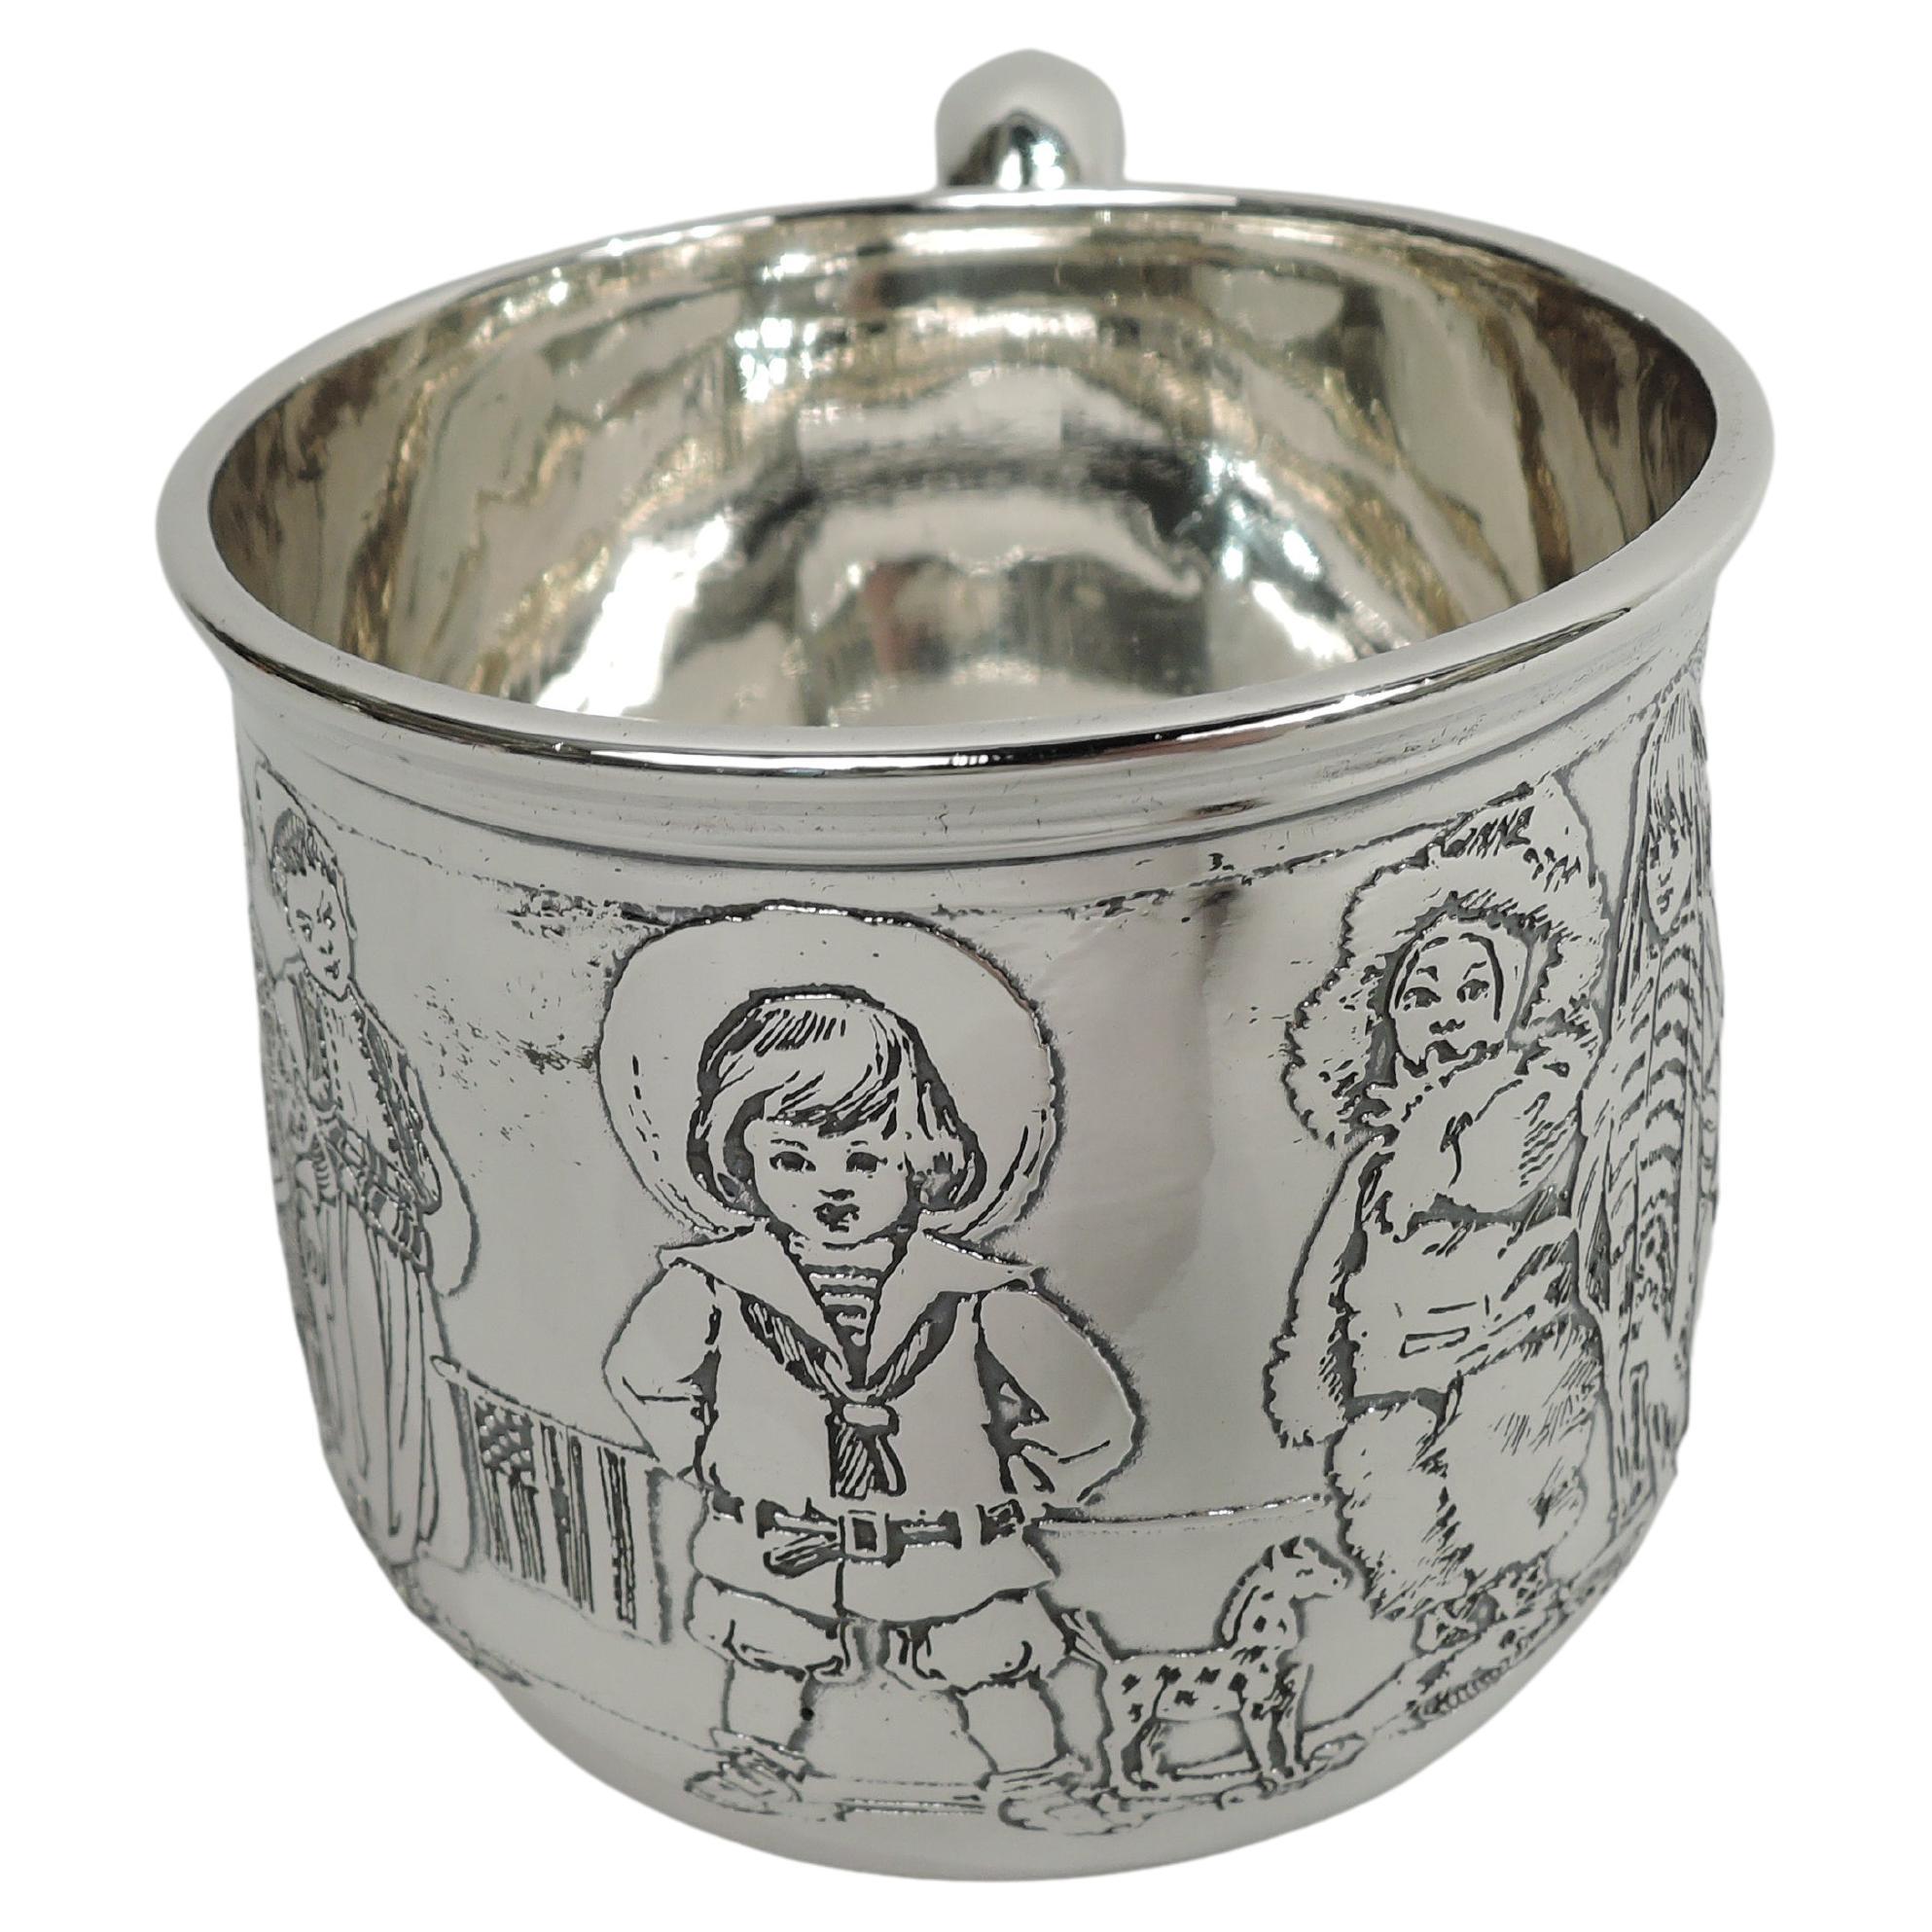 Kerr Sterling Silver Baby Cup Rich in Turn-of-the-century Assumptions